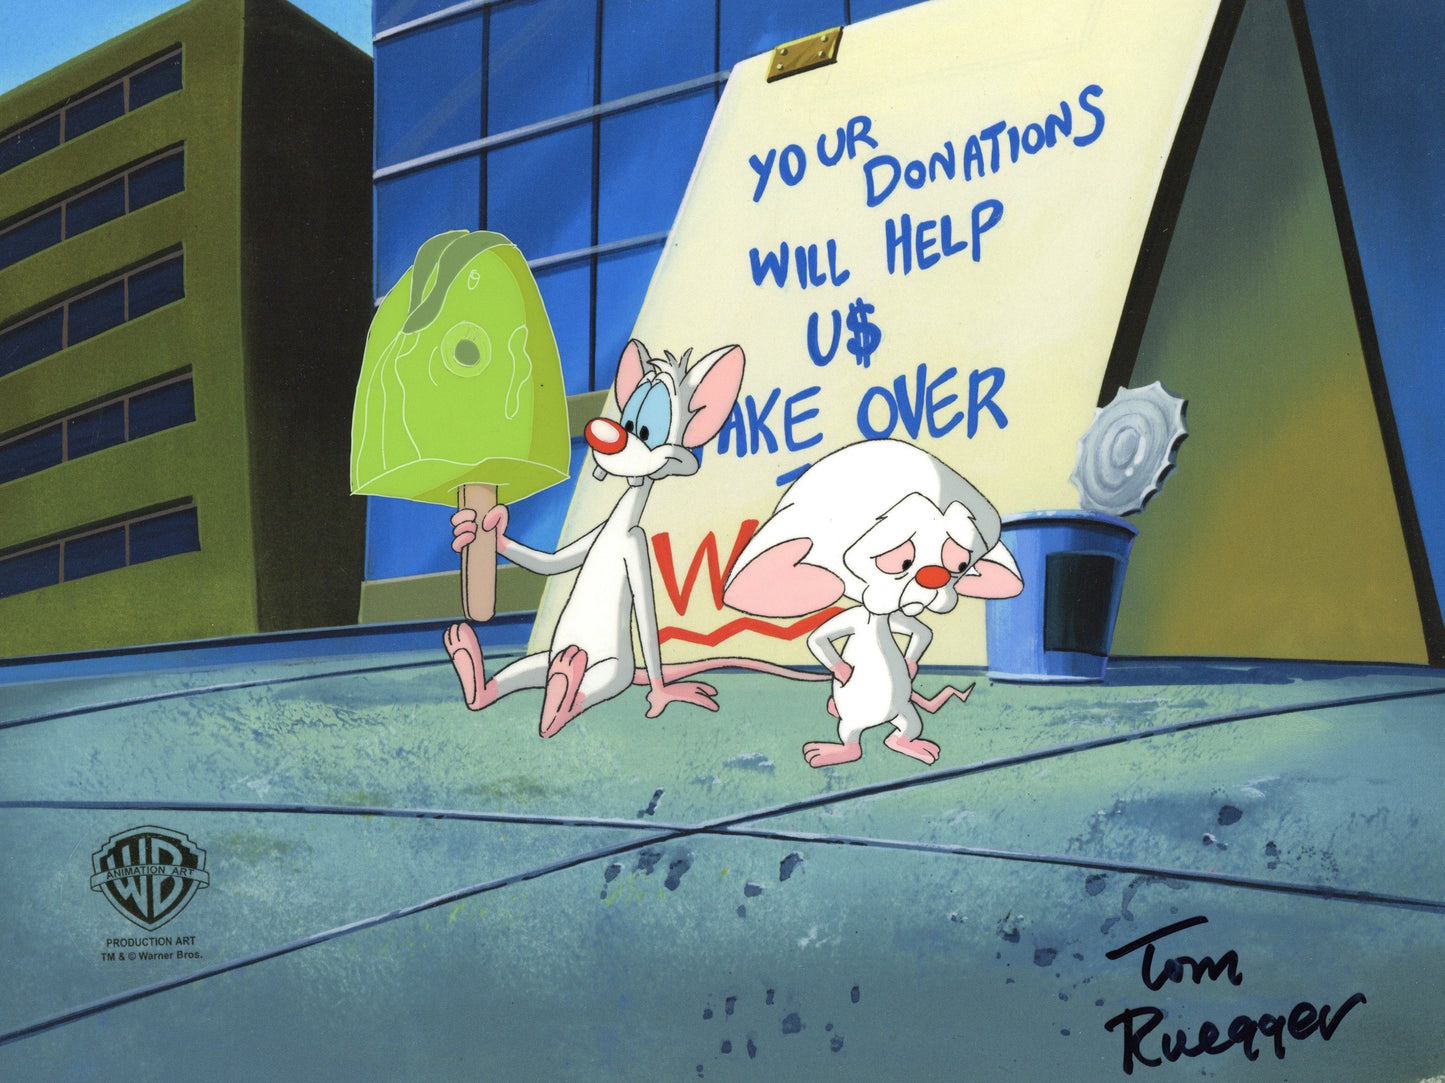 Pinky And The Brain Original Production Cel Signed by Tom Ruegger: Pinky and Brain